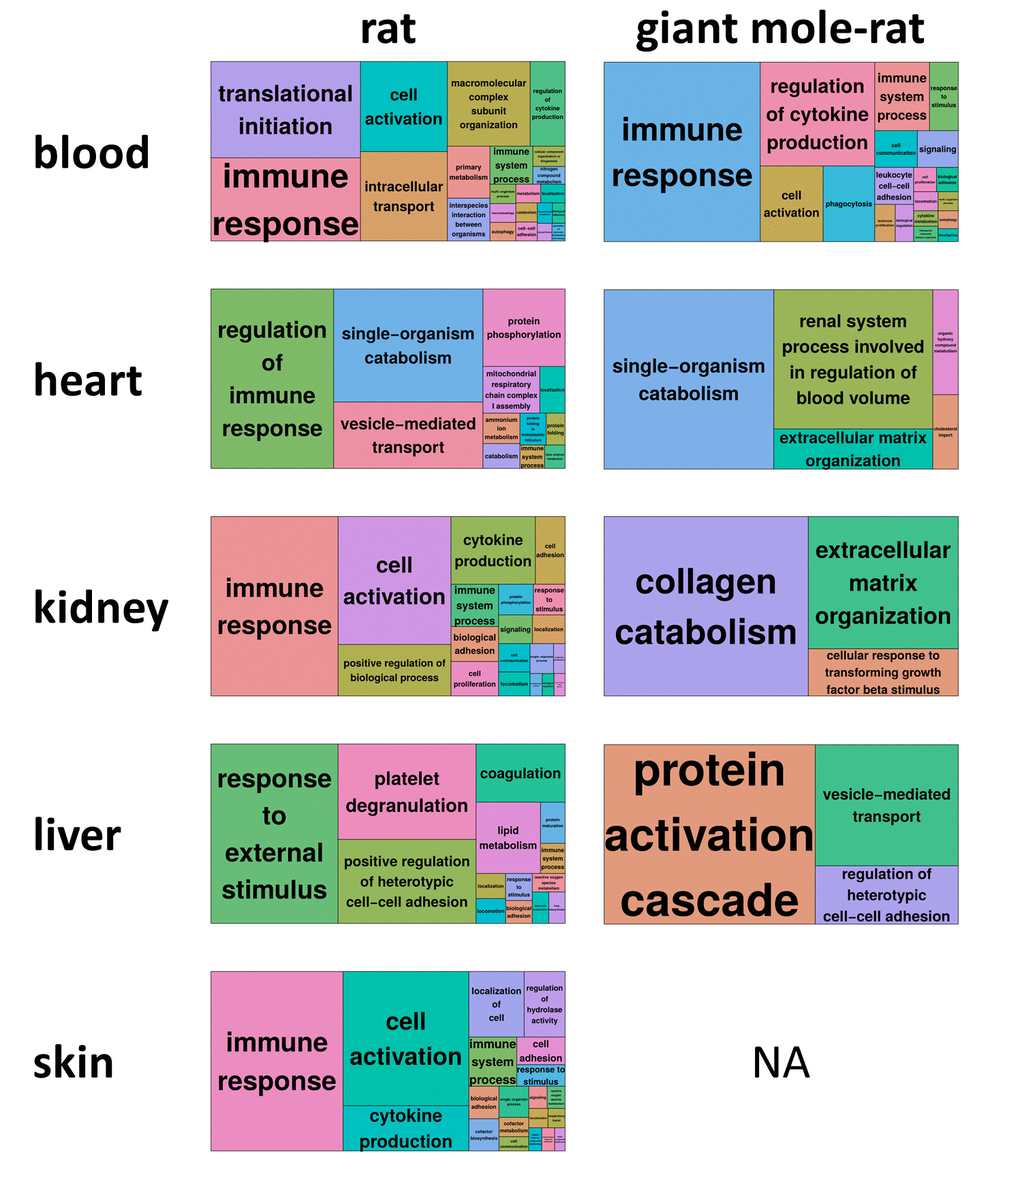 REVIGO treemap summary of gene ontology processes that are significantly enriched (false discovery rate [FDR]  For each species and tissue, the superclusters, i.e., the highest summarization level of gene ontology processes, as identified by REVIGO [13] are shown. Each rectangle painted with a unique color represents a supercluster. The colors only serve to distinguish superclusters. The size of the rectangles represents their p-value, i.e., largest rectangles represent the most significant superclusters. For giant mole-rat skin, no treemap could be generated since no gene ontology process was significantly enriched (Fig. 1b). Corresponding REVIGO treemap summarizations are provided as high-resolution Figures S1-S9, showing also the clusters within the superclusters.